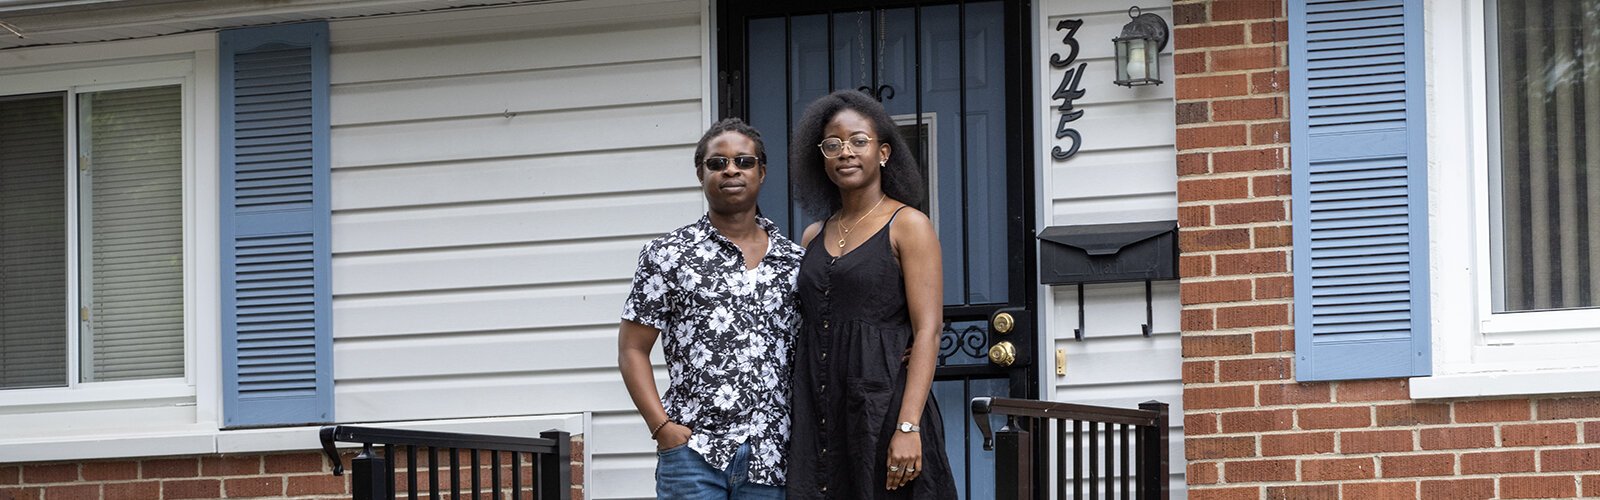 29-year-old Elliot Kugbe moved to Greenhills with his wife, Christelle, and his parents where they found a four-bedroom that was a “pretty, simple, beautiful, small house”  built in 1954.